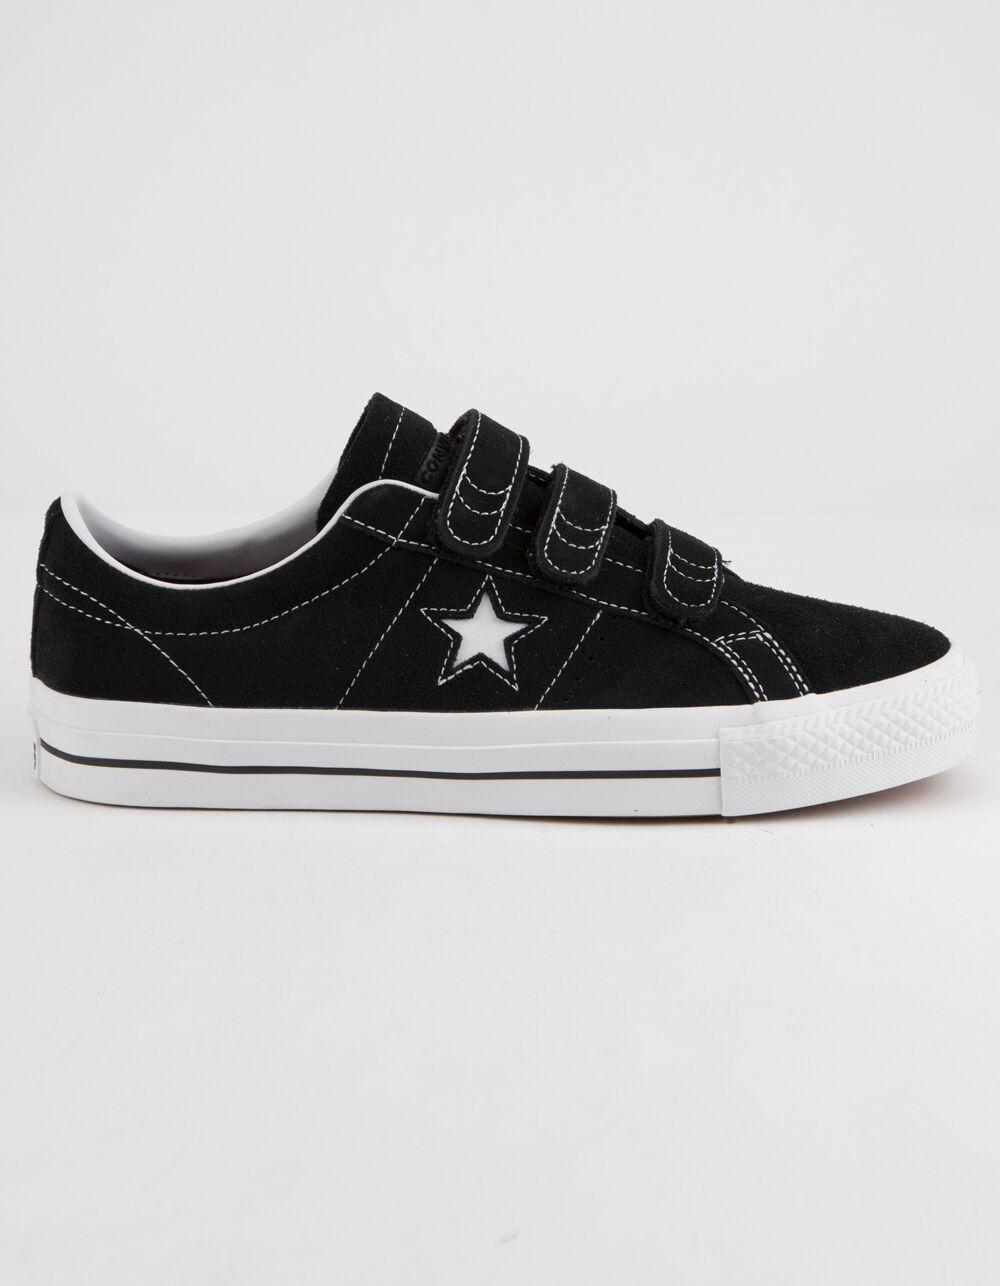 Converse Suede One Star Pro 3v Ox Black \u0026 White Shoes for Men - Lyst